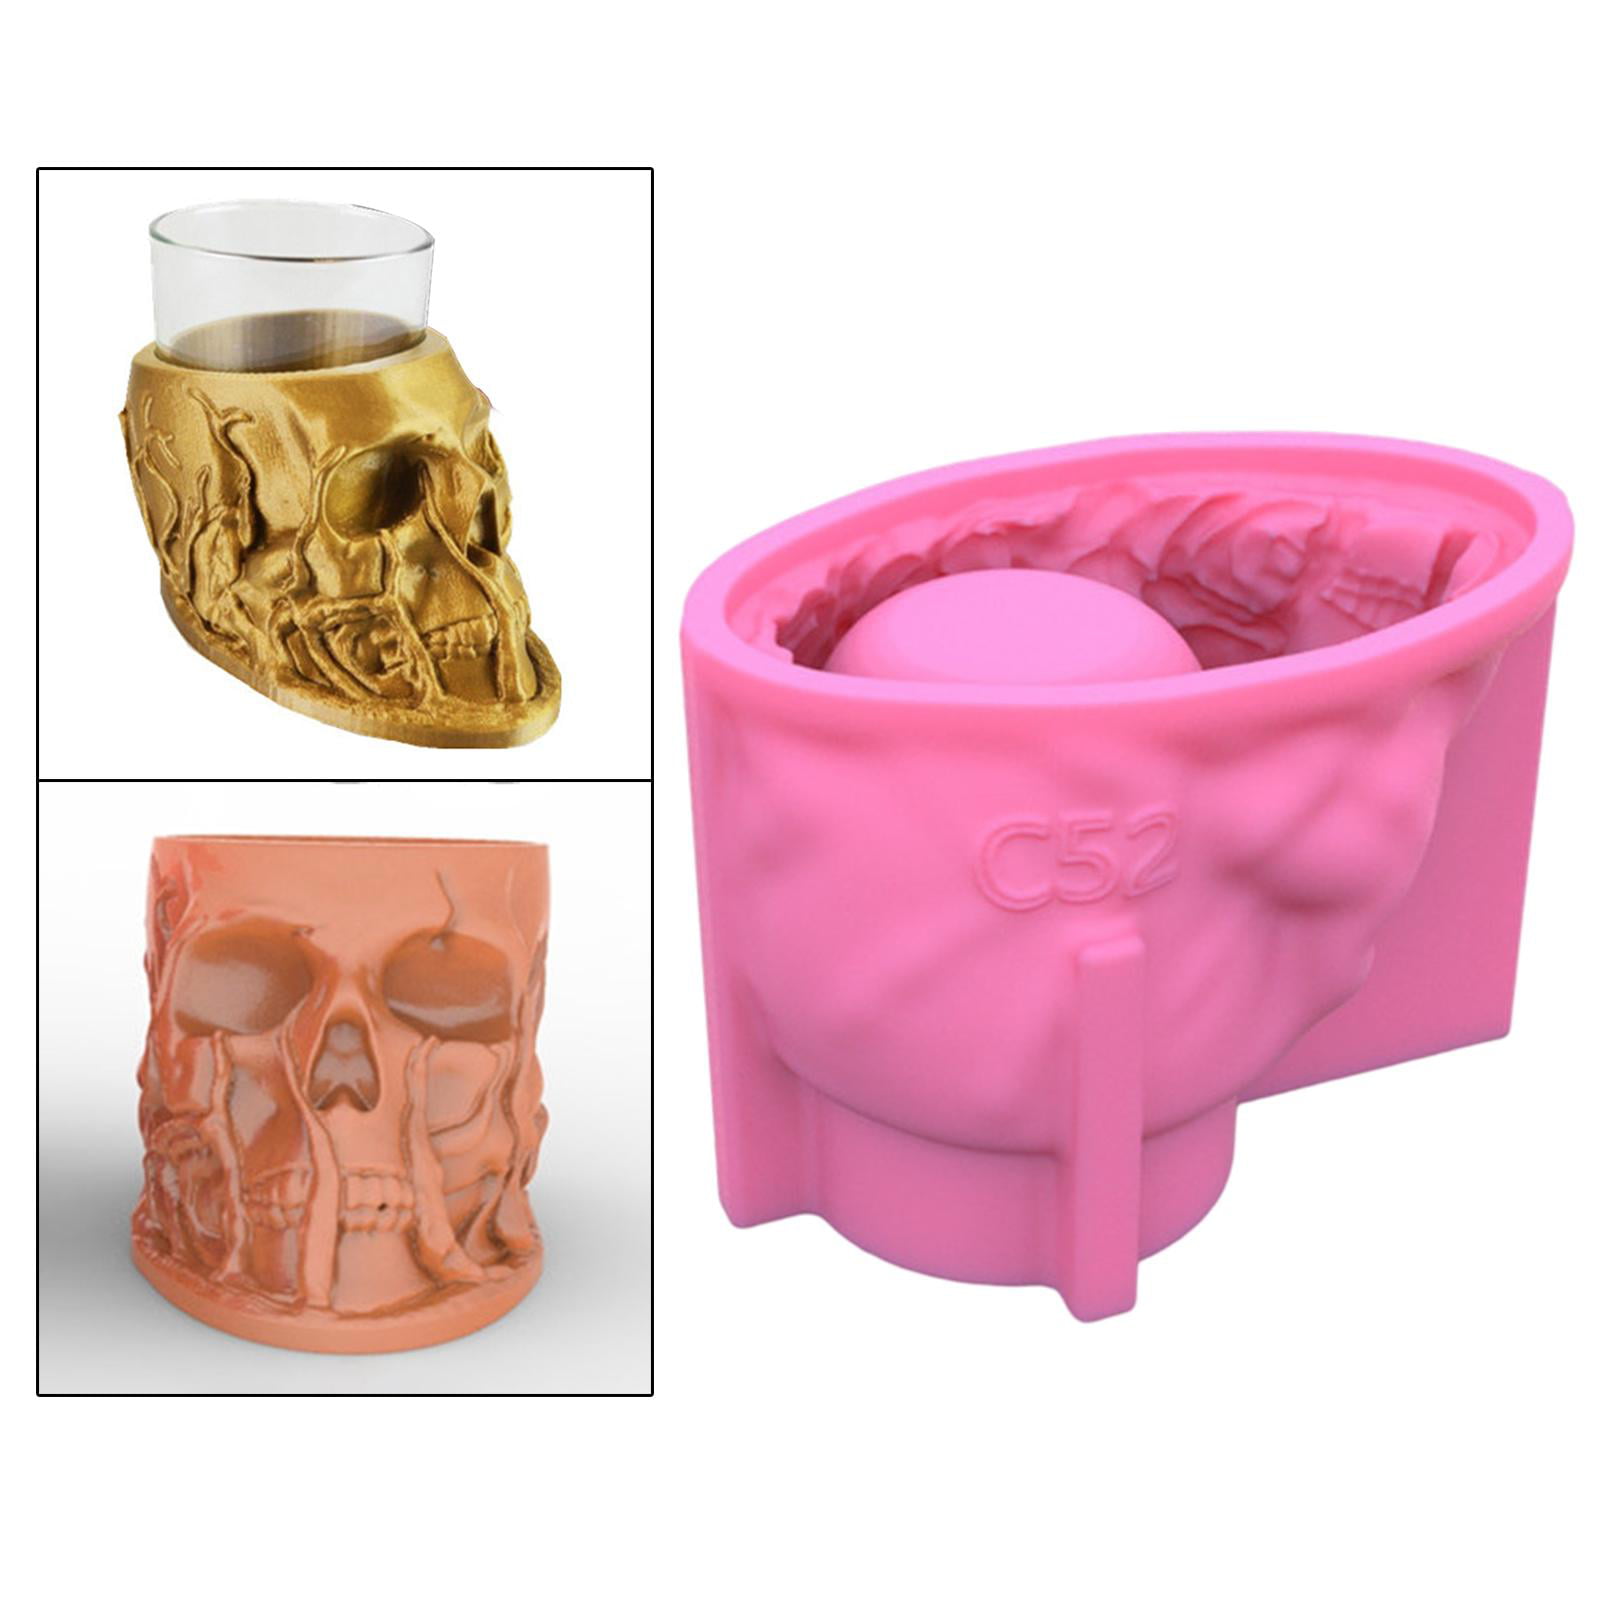 Golden Skull Silicone Mold Ashtray 3D Candle Flower Pot Interior Decoration Tool 